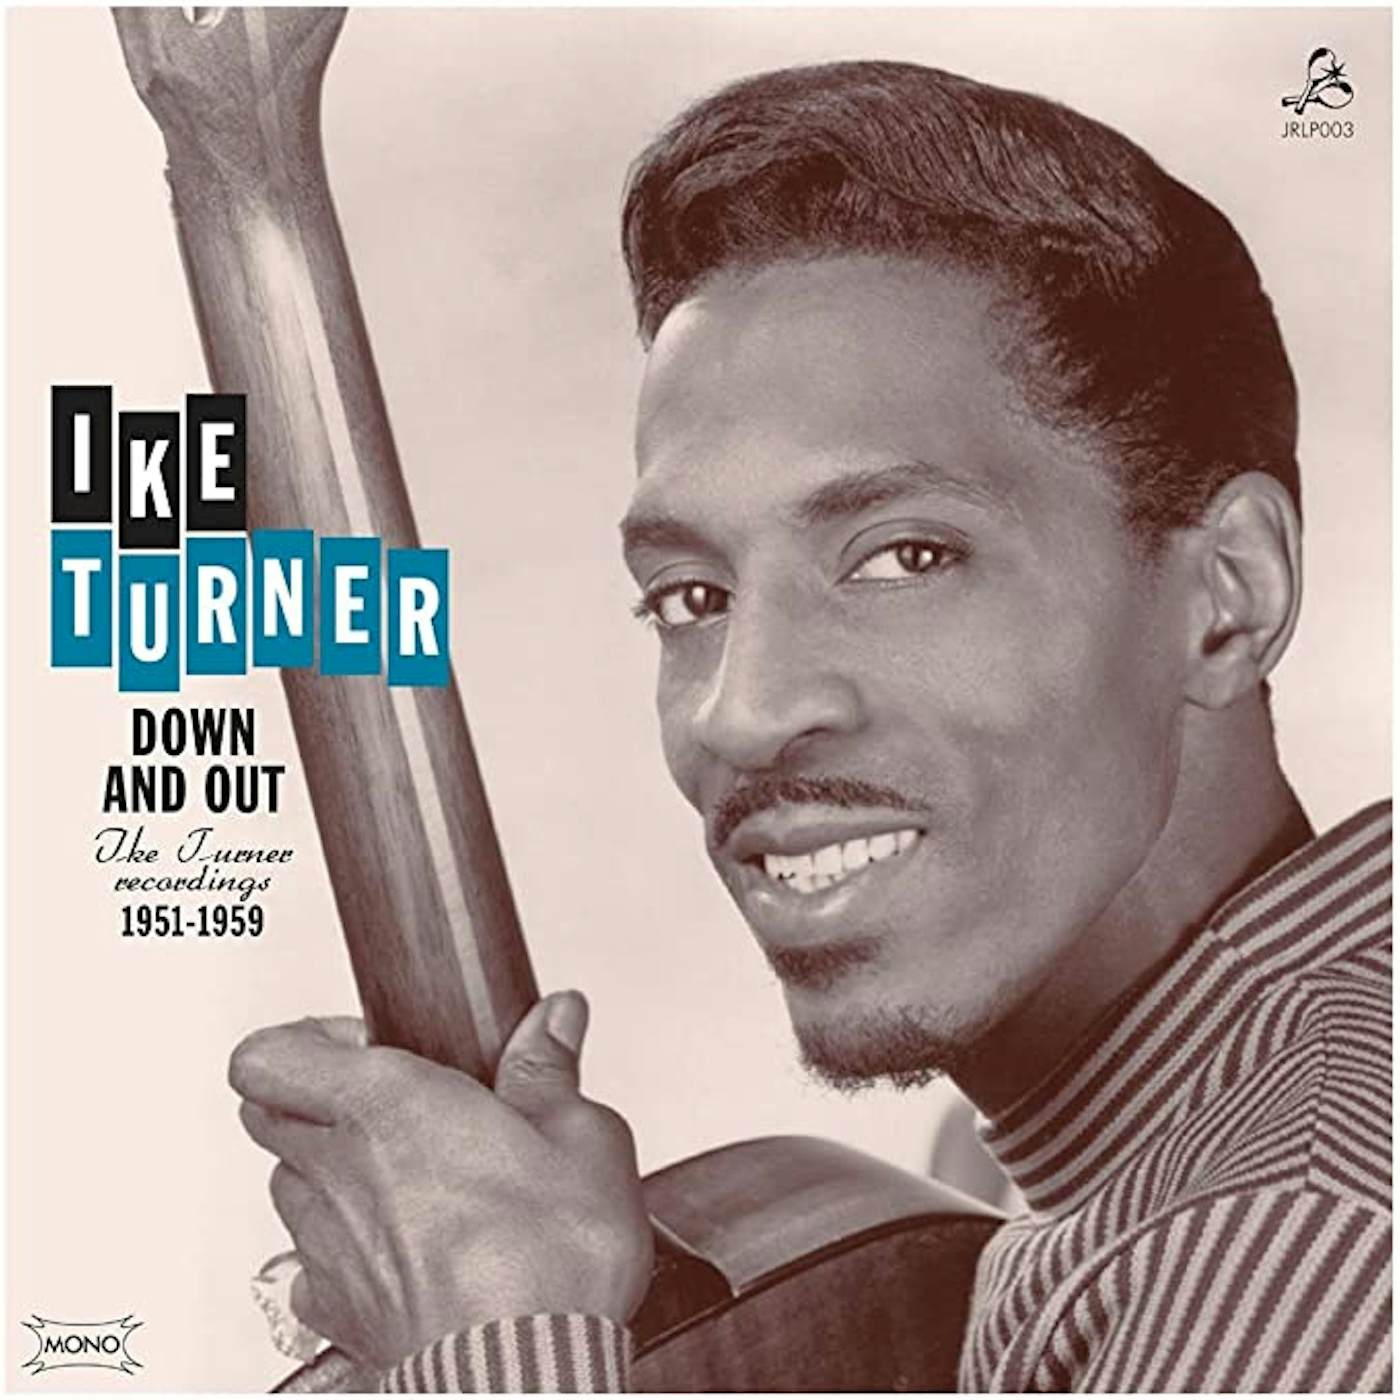 DOWN & OUT: IKE TURNER RECORDINGS 1951-1959 Vinyl Record